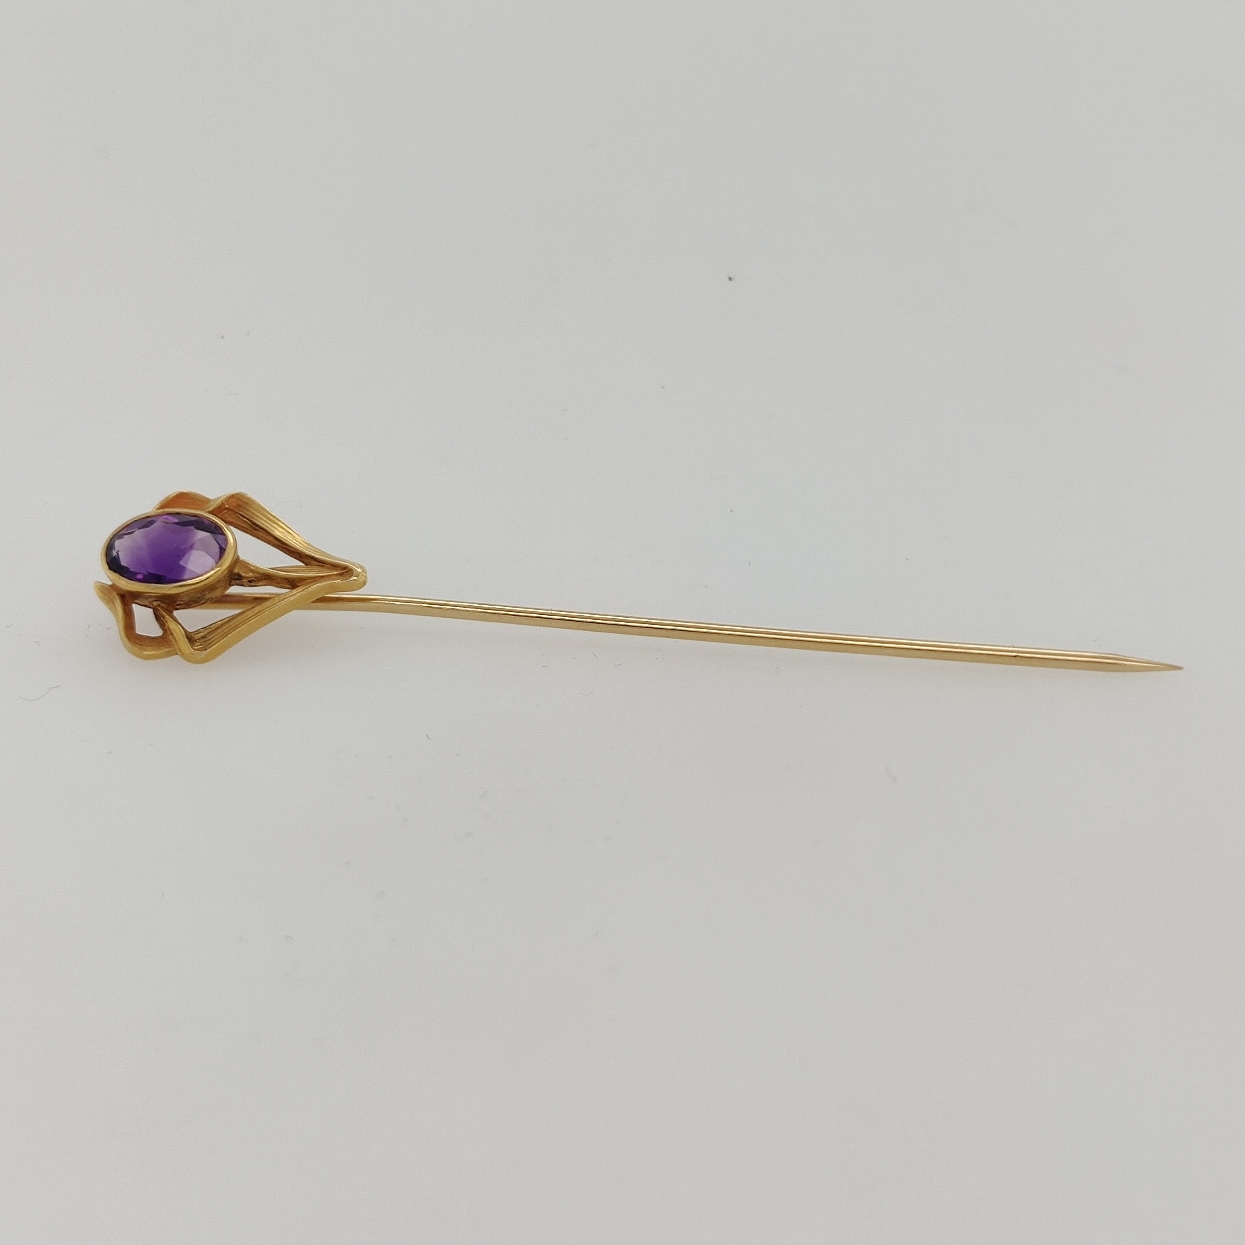 Antique 14K Yellow Gold Art Nouveau Stick Pin with Oval Amethyst